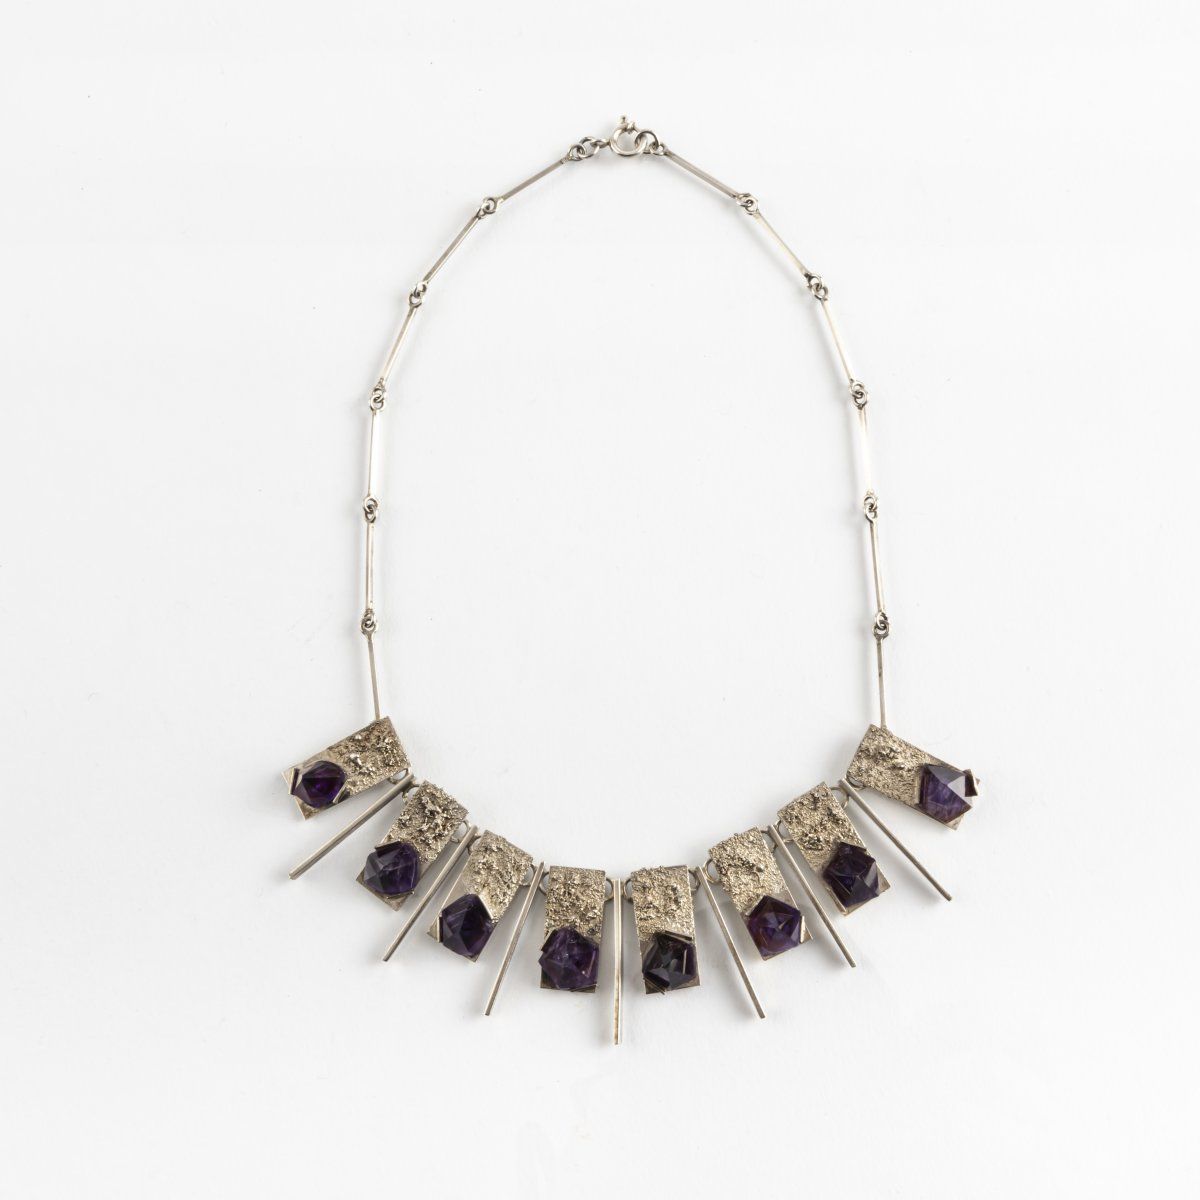 Null Germany, Collier, 1960s, Silver, amethysts. 48.39 grams. L. (open) 430 mm. &hellip;